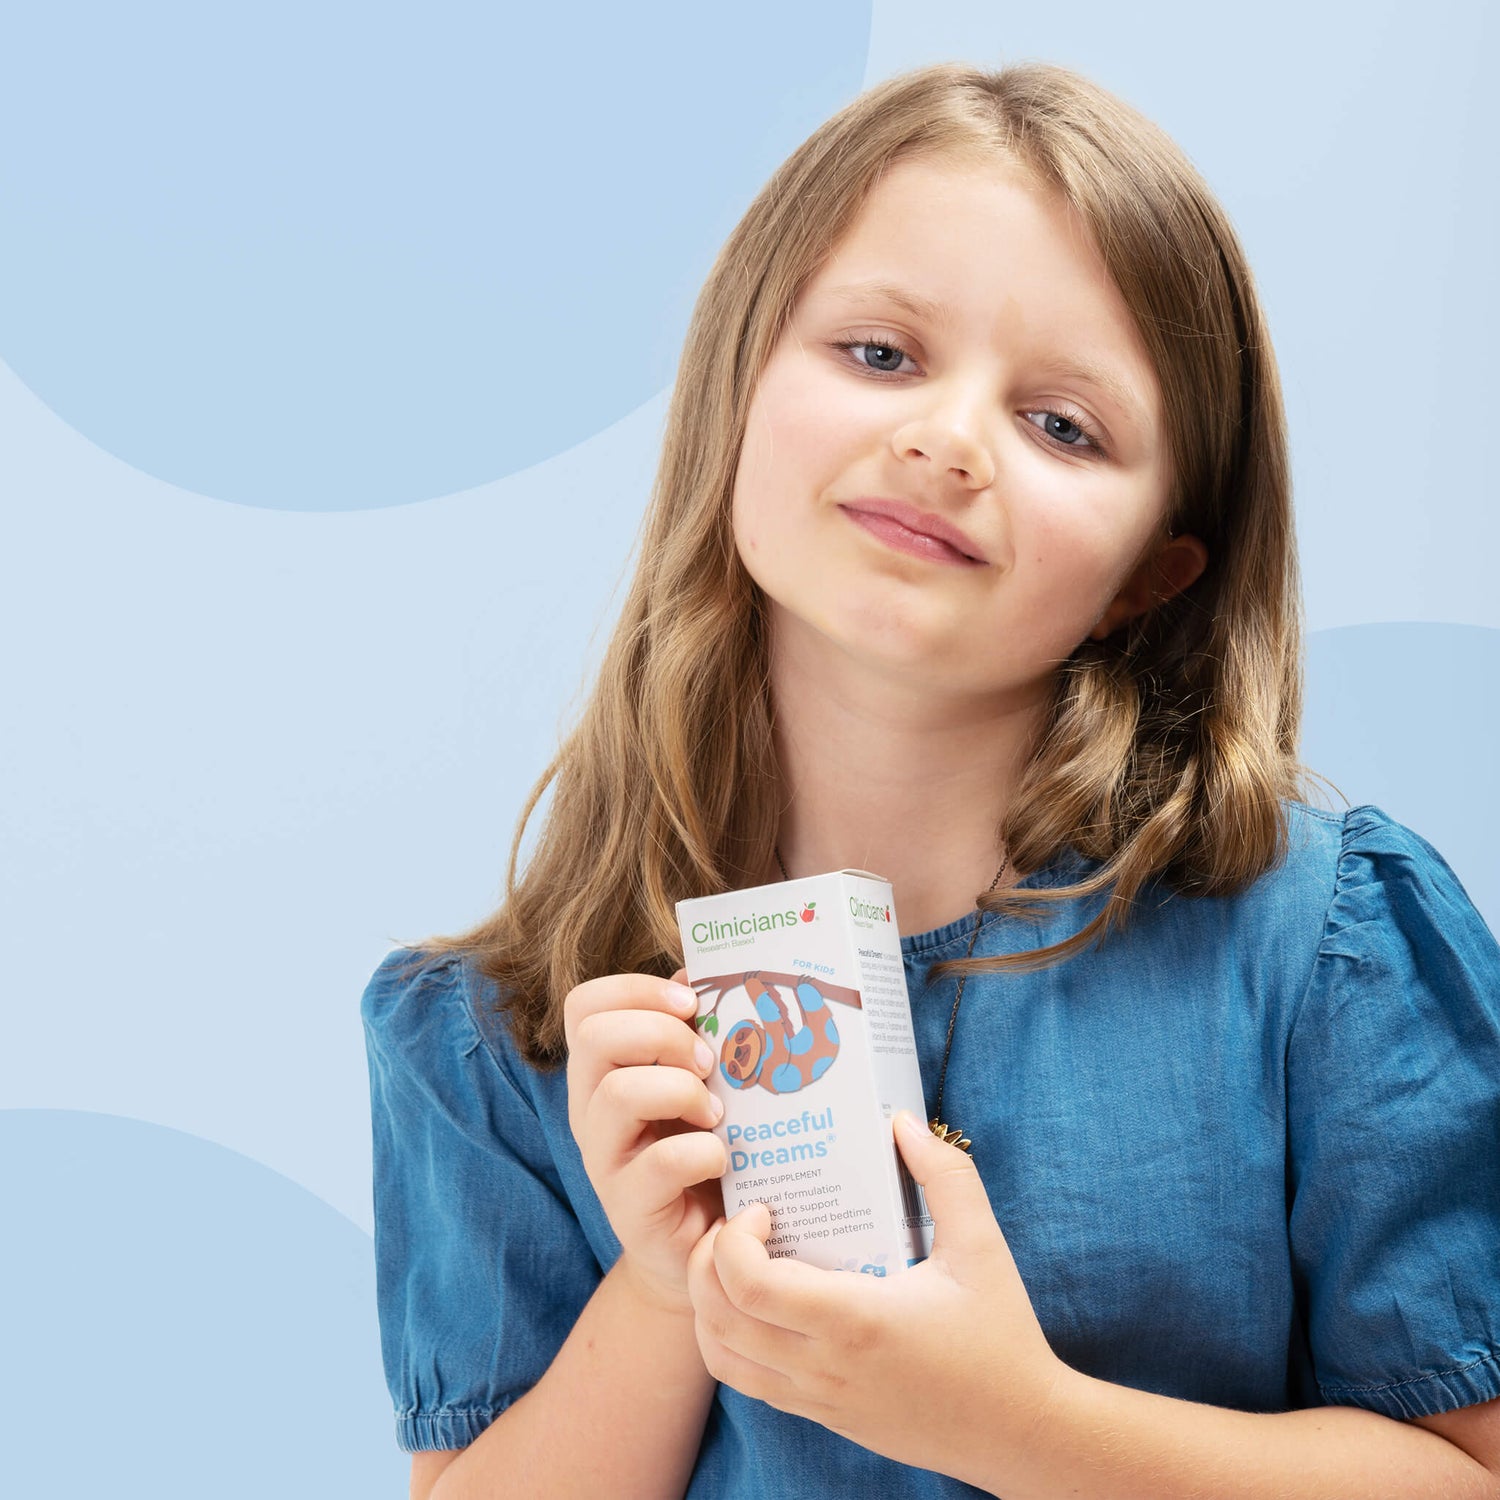 Child holding a box of Clinicians Peaceful Dreams